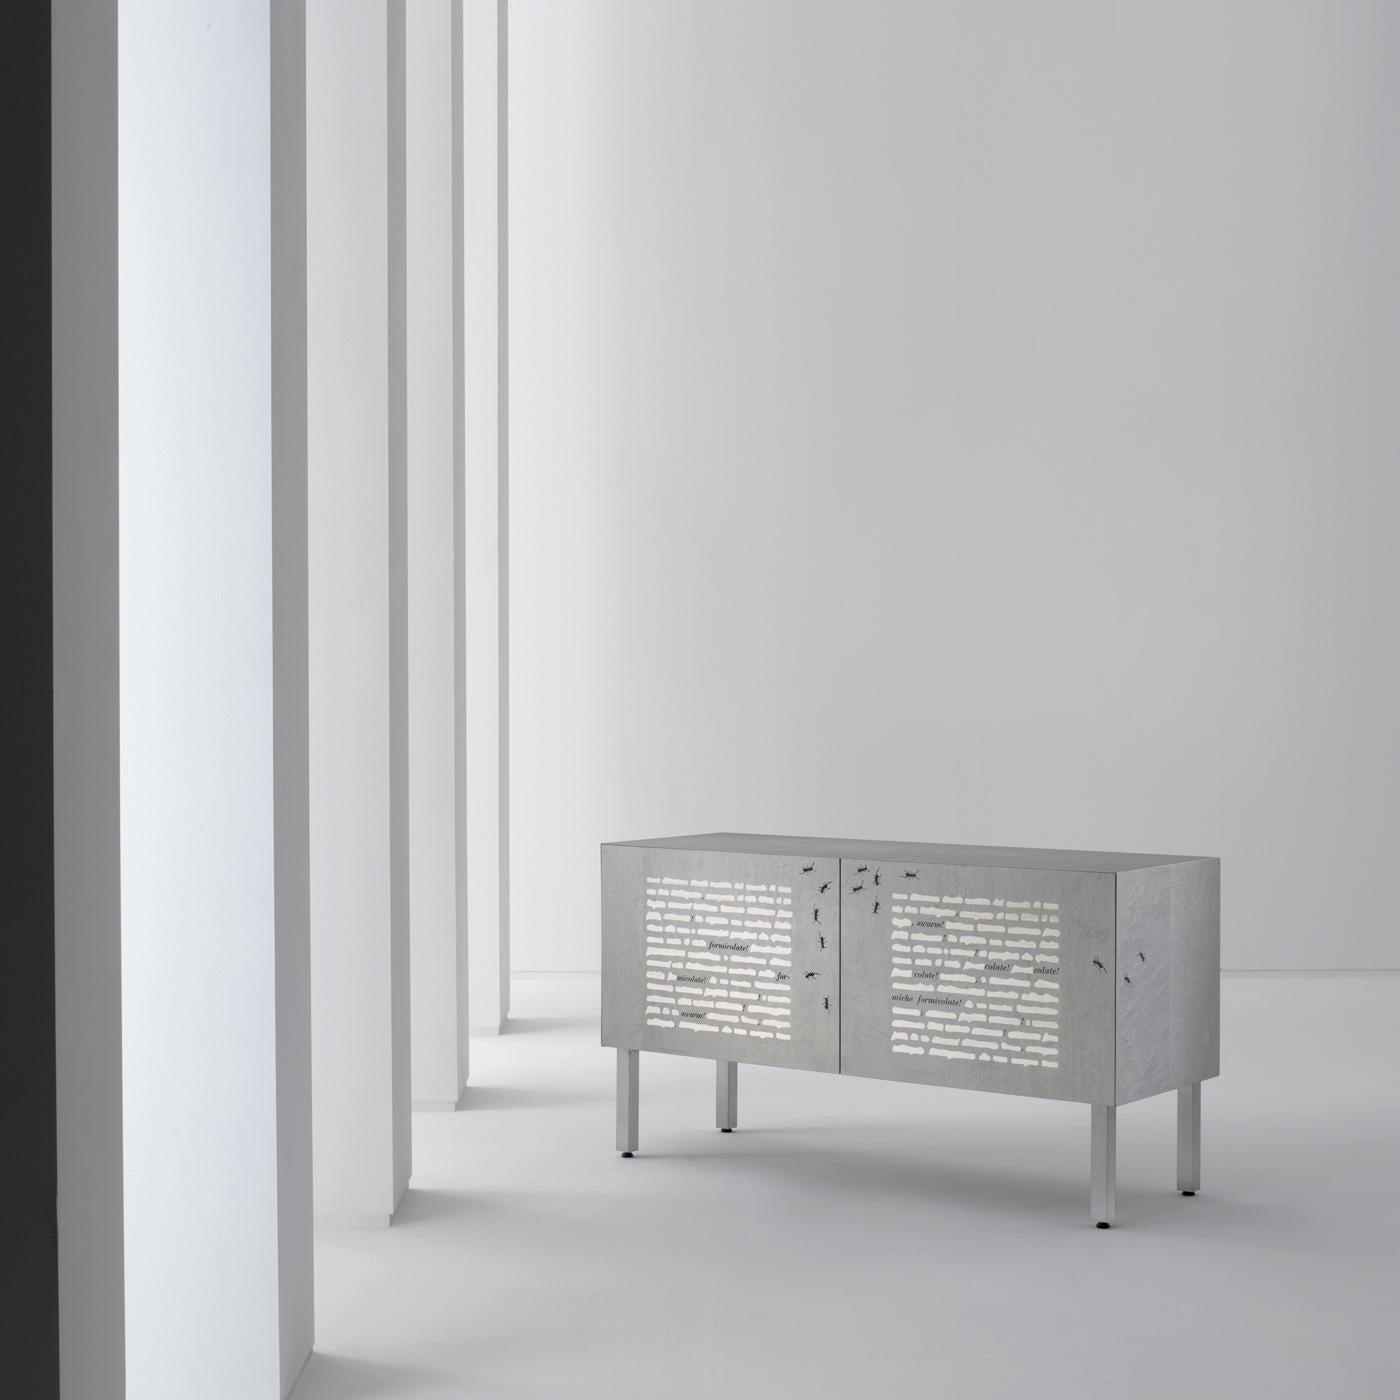 Sideboard with brushed metal legs and base, inlaid doors and structure. Fitted with push-pull doors and one internal shelf. It is also available in the hanging version.

FINISH:
Limited Edition Art Inlay

Thought the traditional “cancellature” (wood